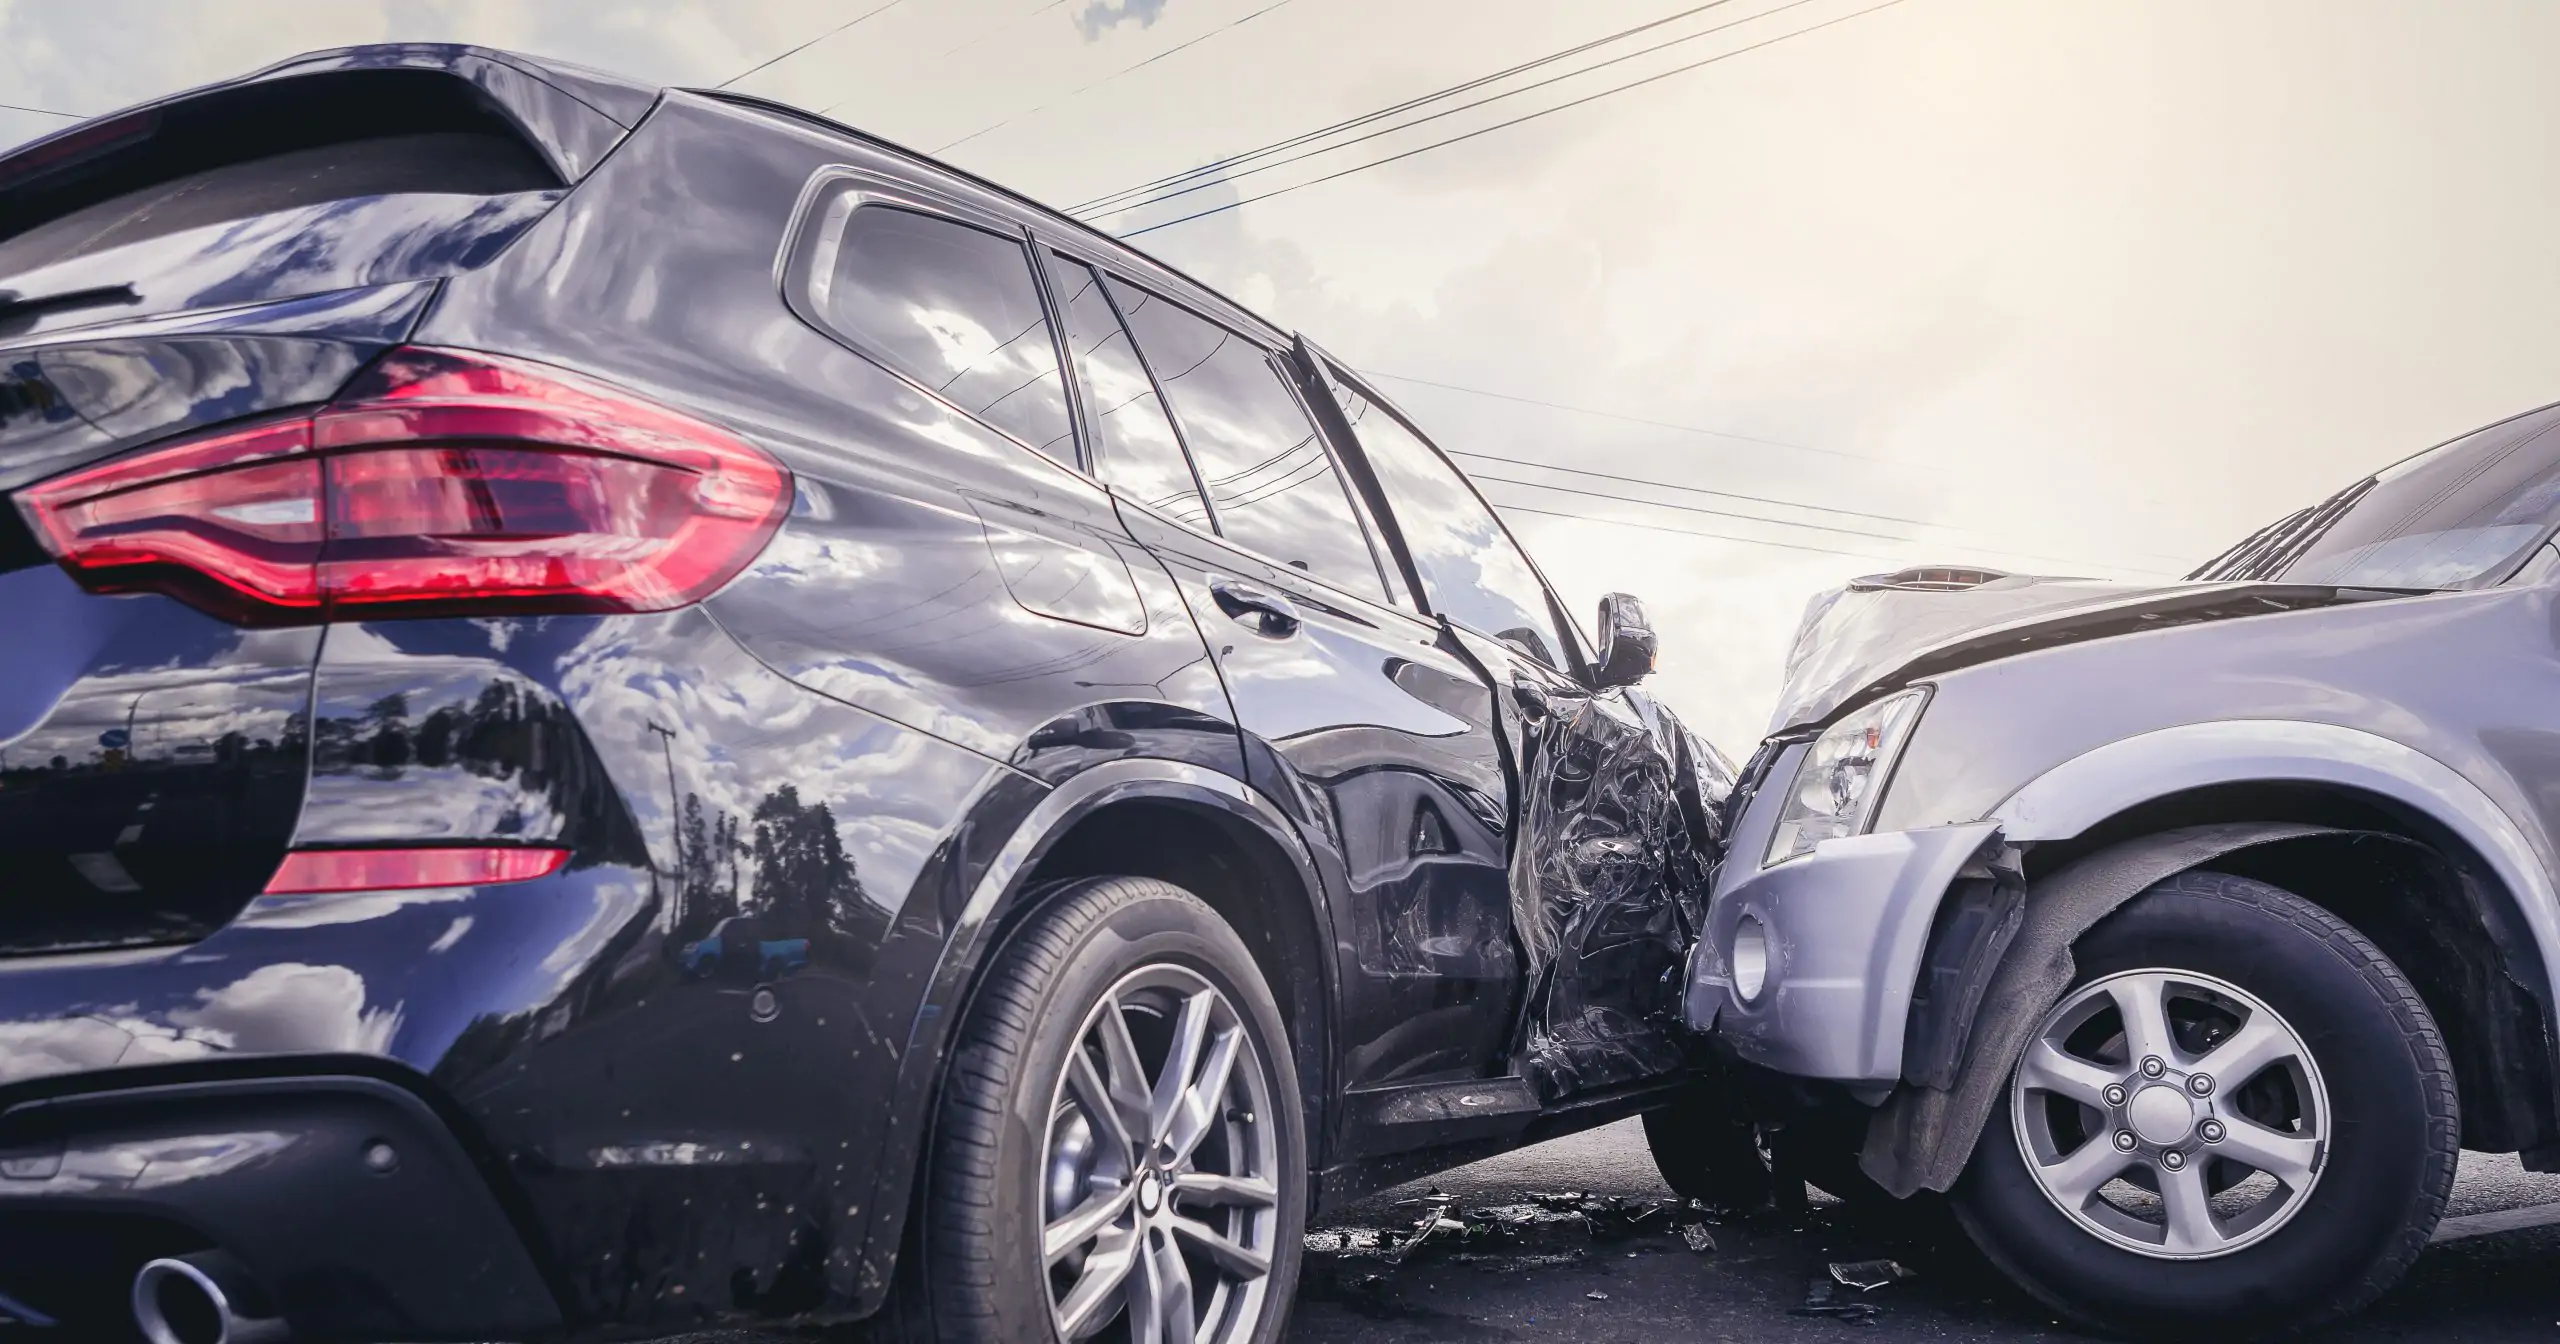 auto accident lawyers in ny, nj and connecticut